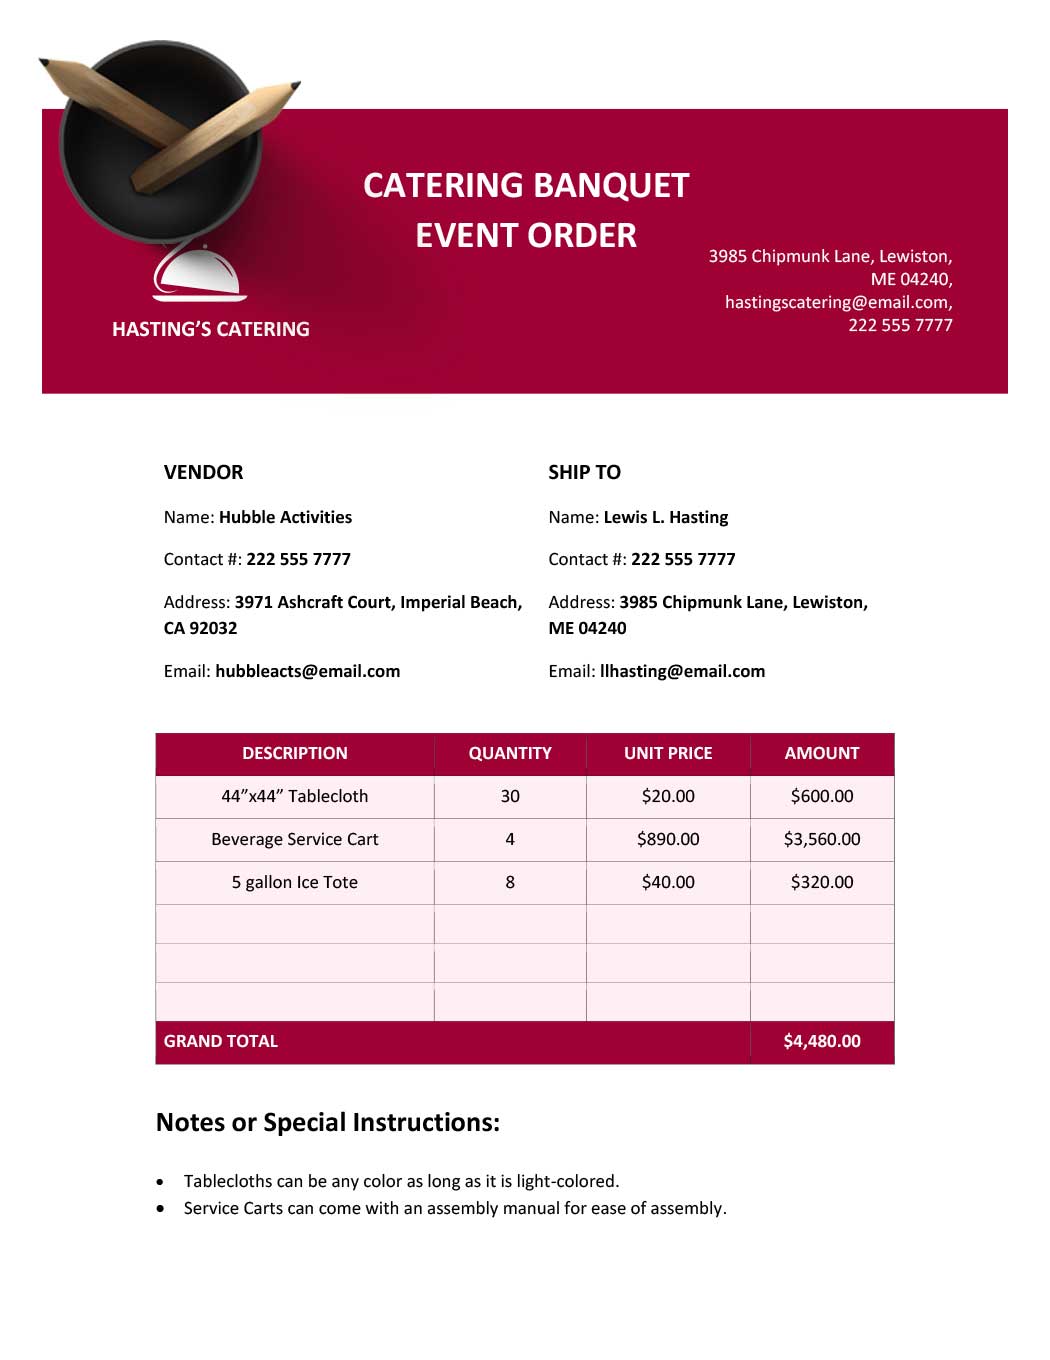 Catering Banquet Event Order Template